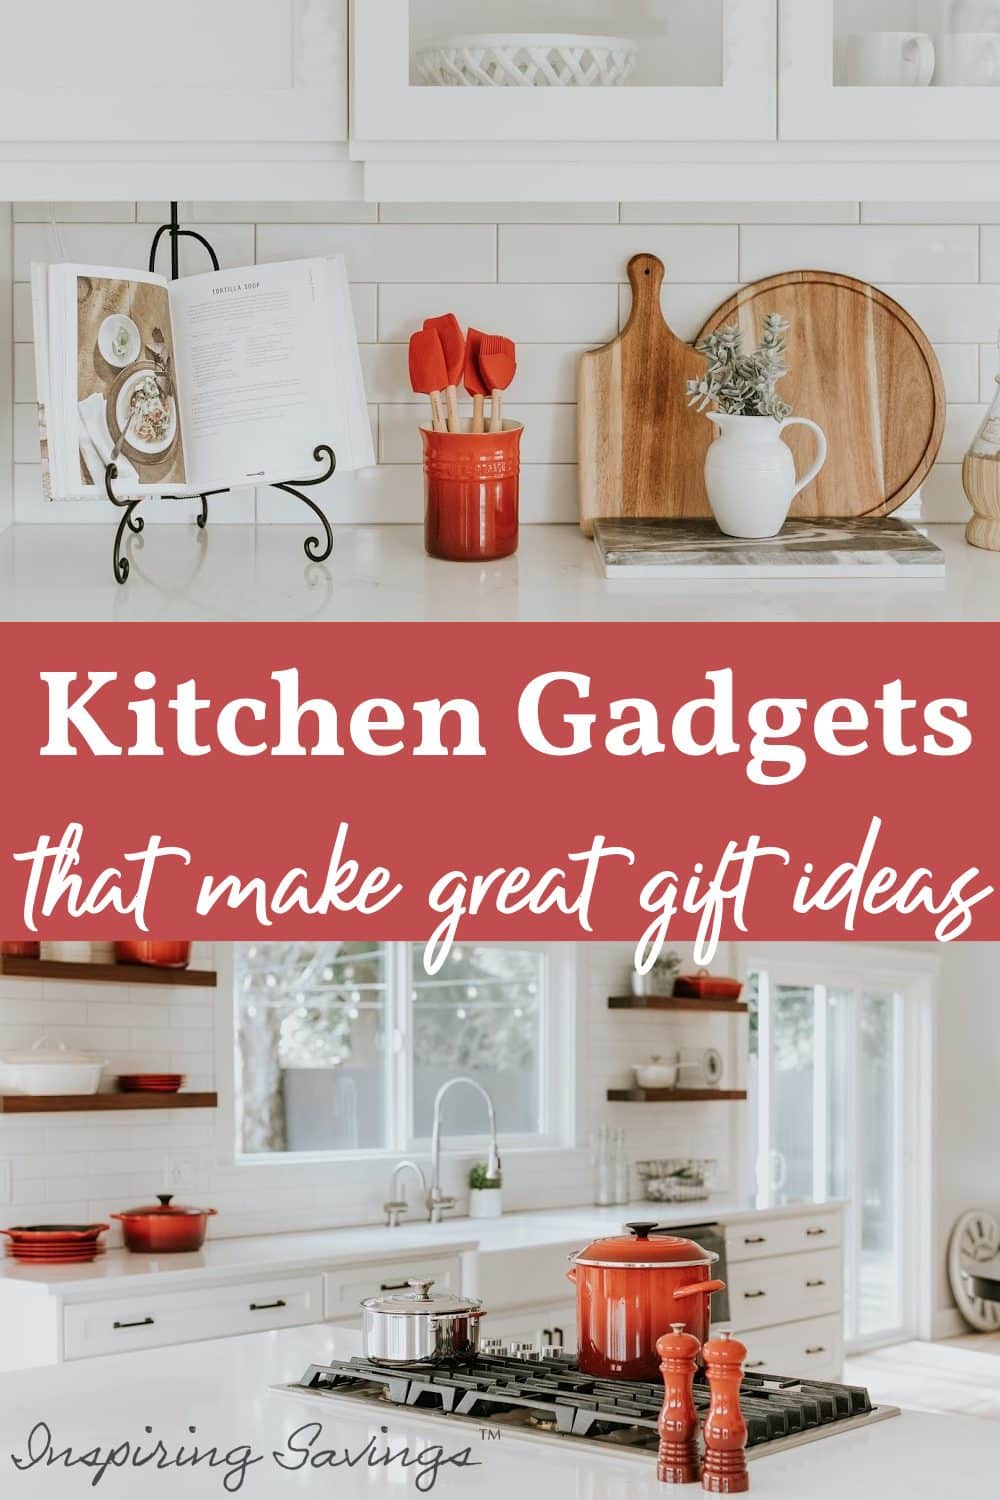 Picture of Cool Kitchen Gadgets that makes great gift ideas from Inspiring Savings